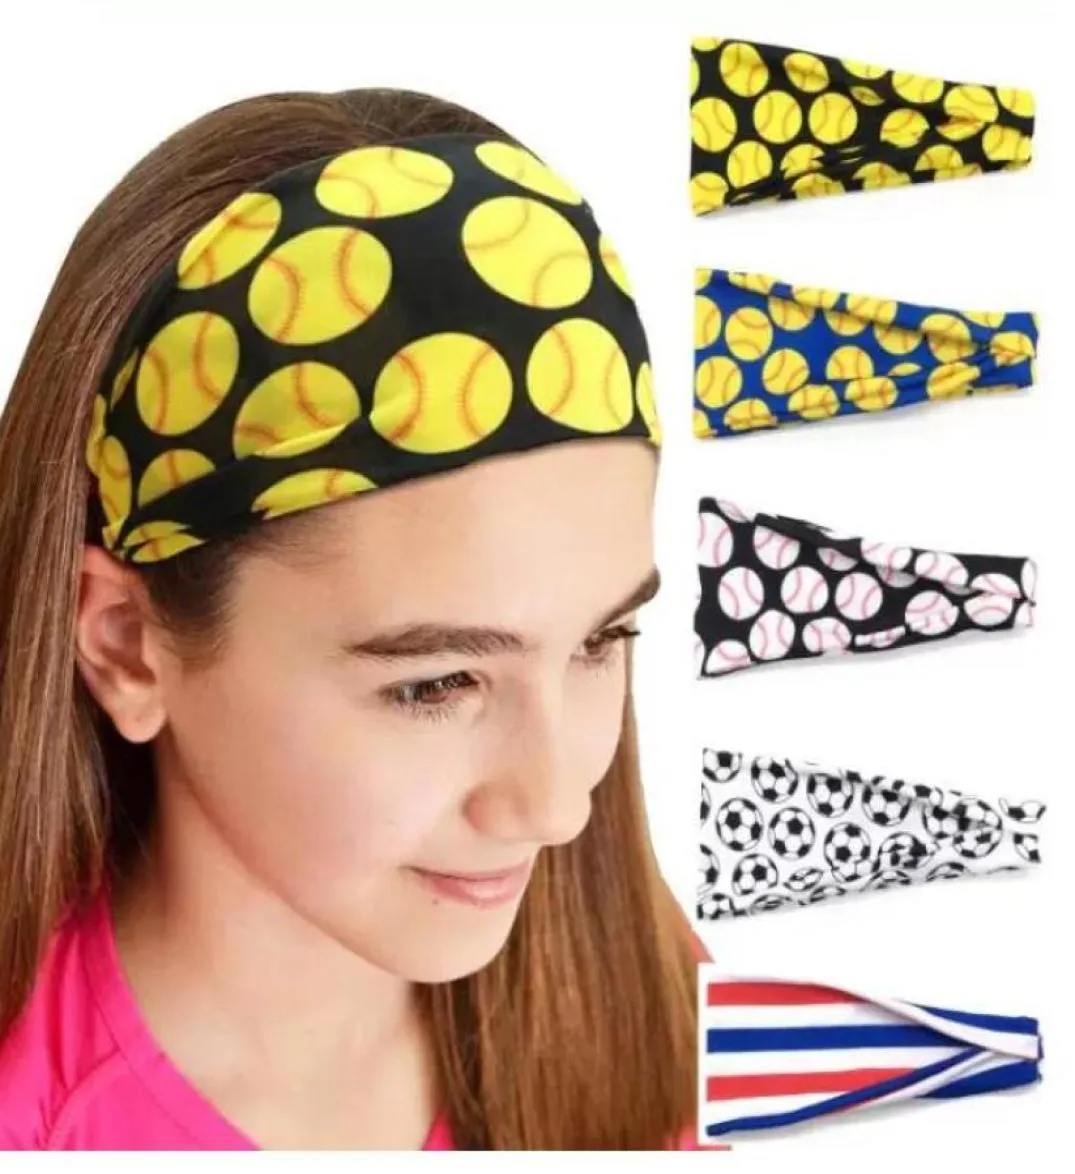 Titanium Sport Accessories Baseball Sports Hairband Sweat Headbands Hairbow Stretchy Athletic Yoga Play Hair Band Workout Head Wra2848894